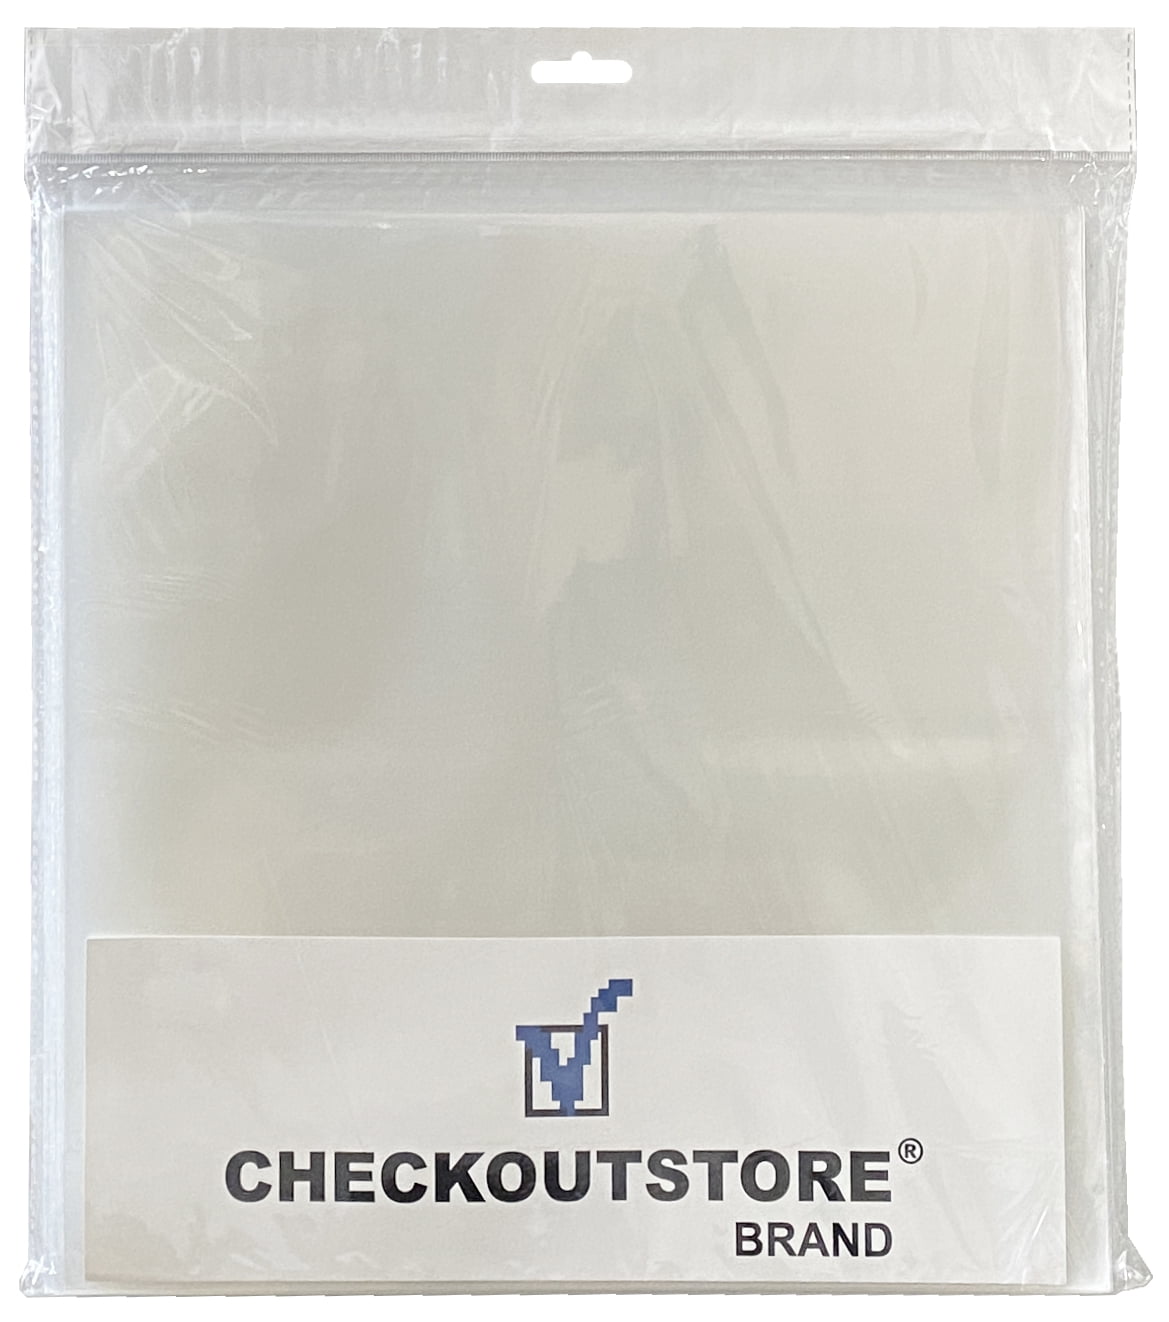 PACK OF 50 x POLYPROPYLENE RESEALABLE STORAGE BAGS FOR 7" VINYL SINGLES. 